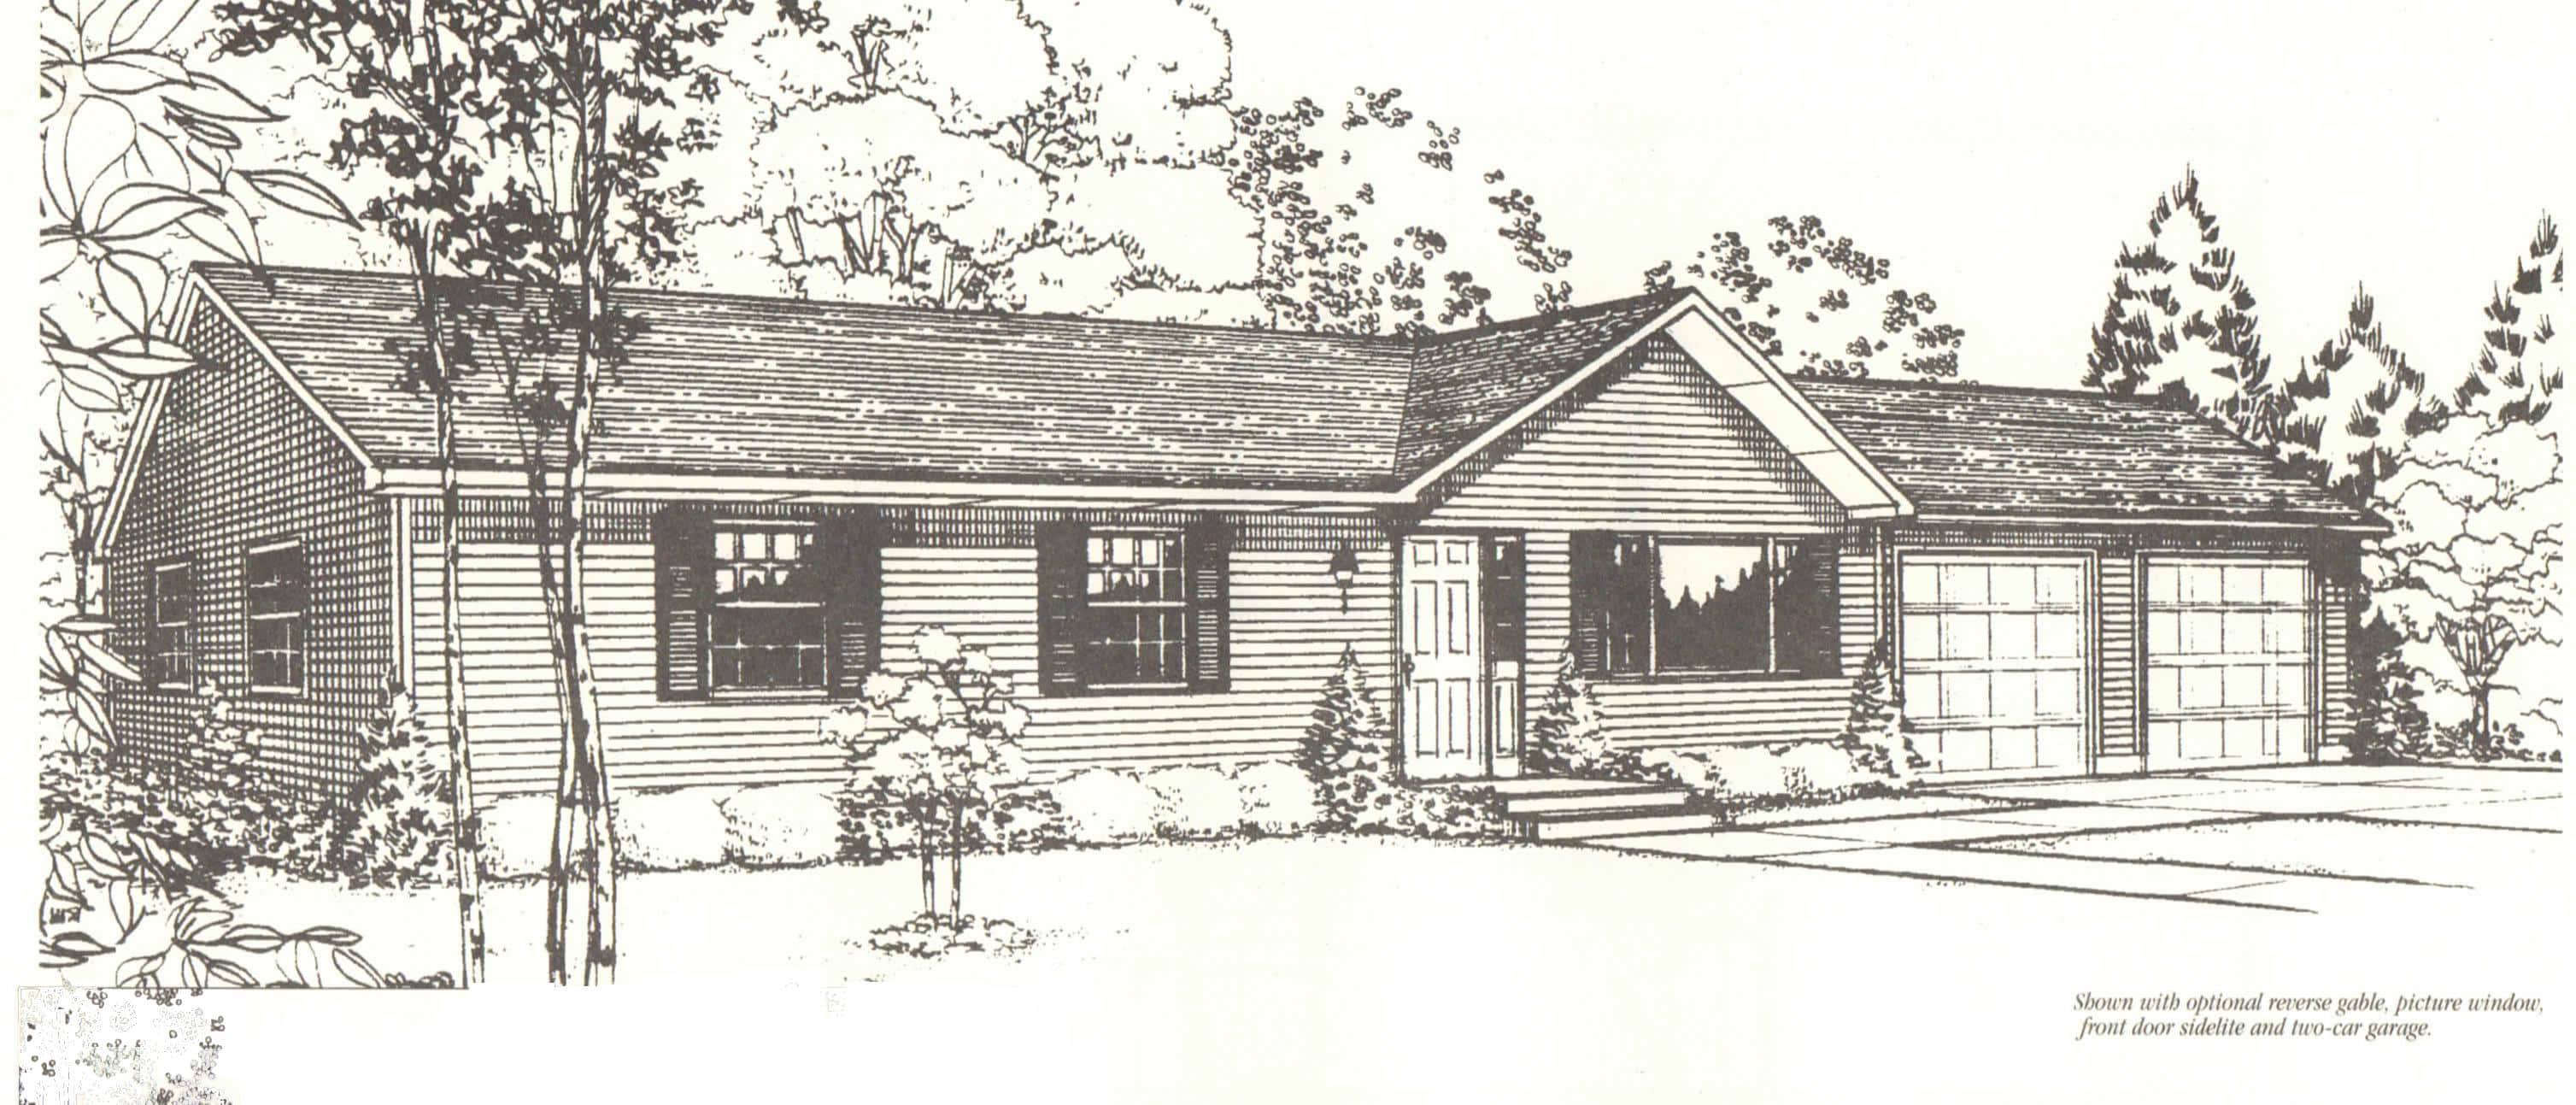 The Birchwood Ranch Style Home